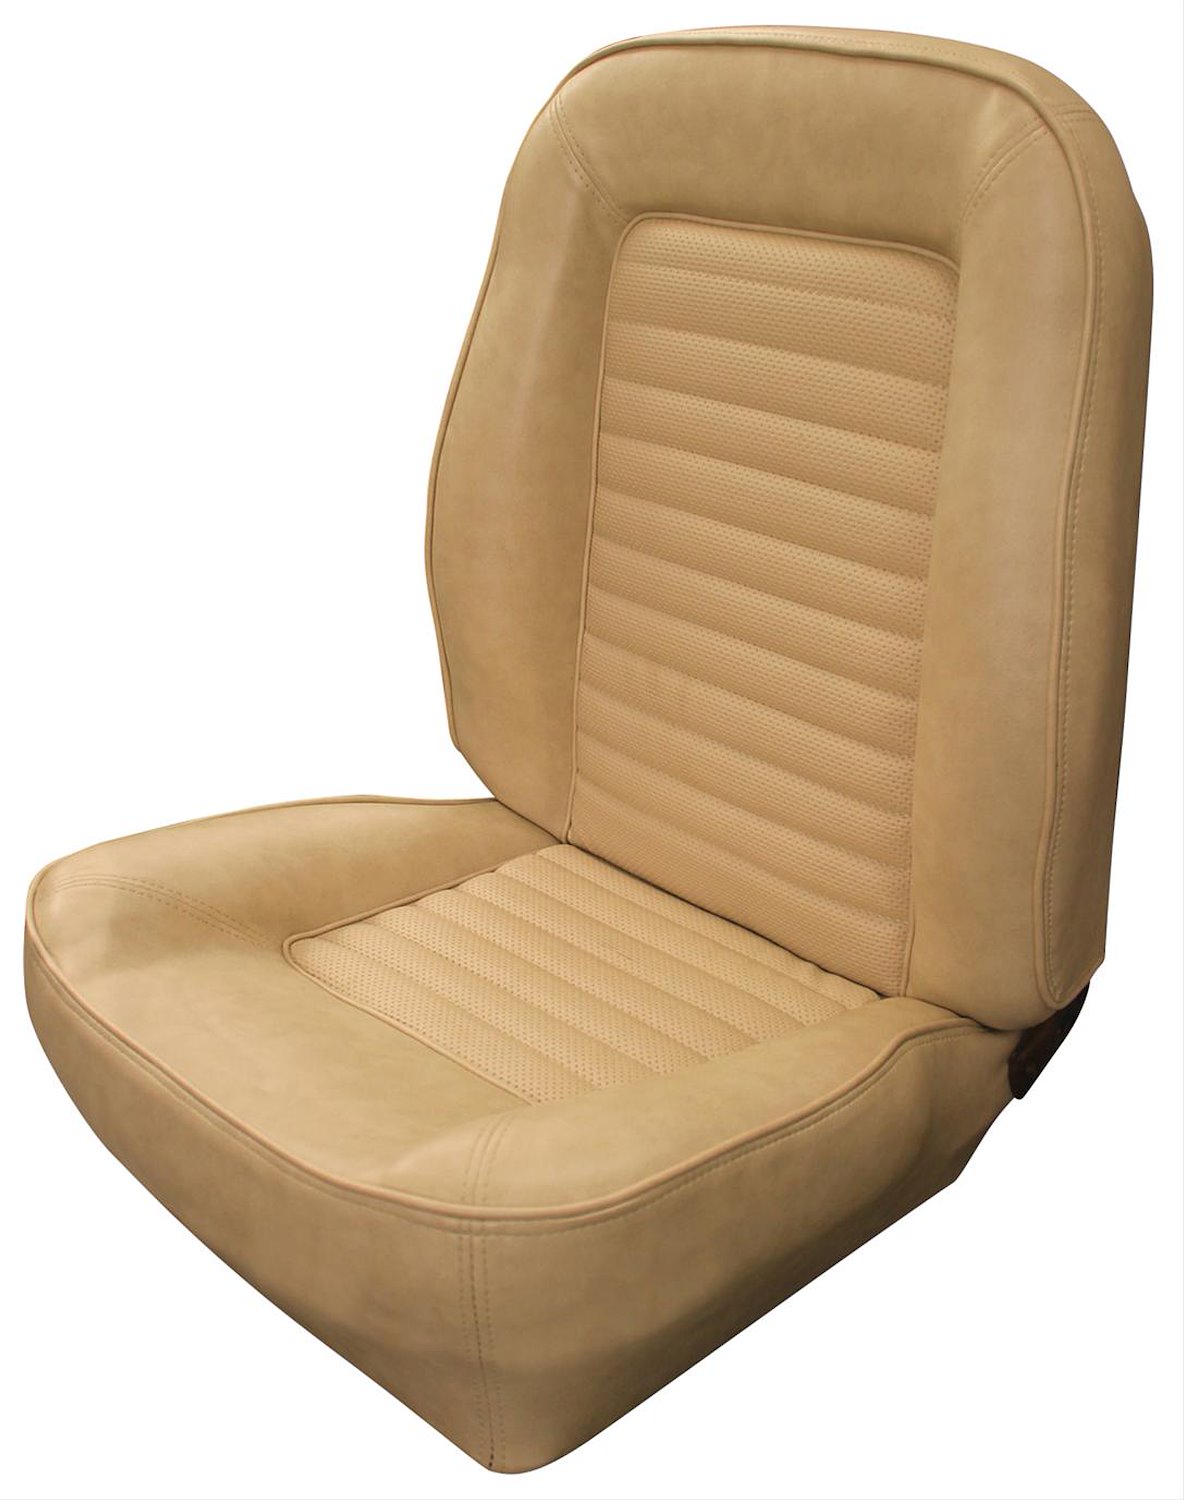 1966 Ford Mustang 2+2 Standard Interior Touring Style Front Bucket and Rear Bench Seat Upholstery Set